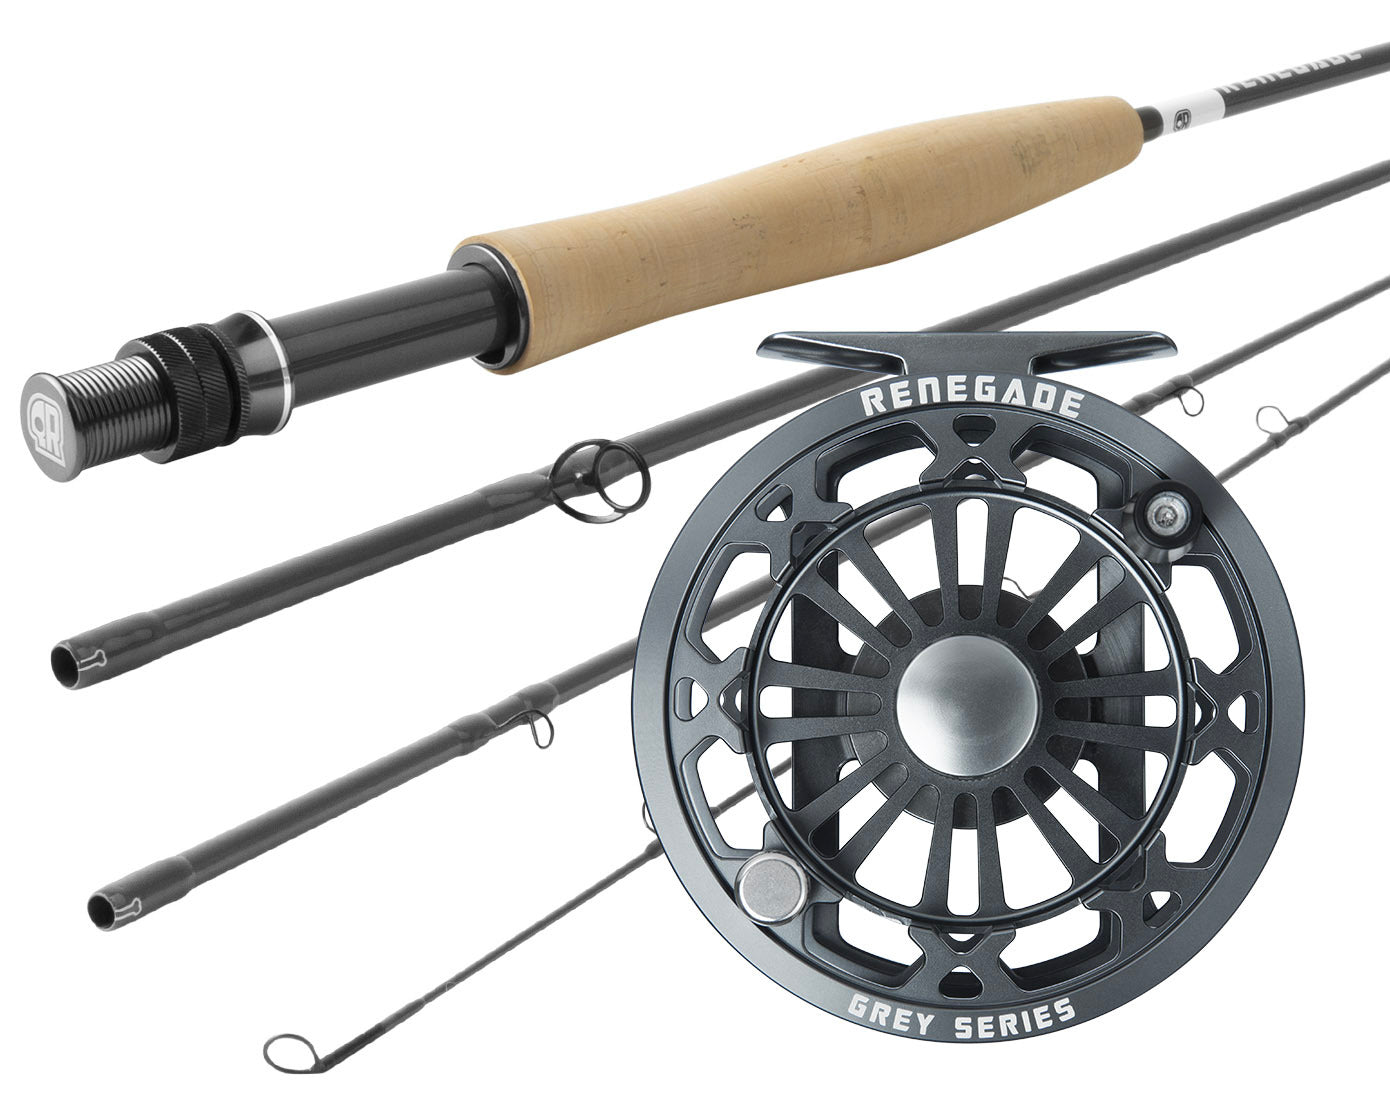 Has anyone used this brand (renegade)? Thoughts? : r/flyfishing